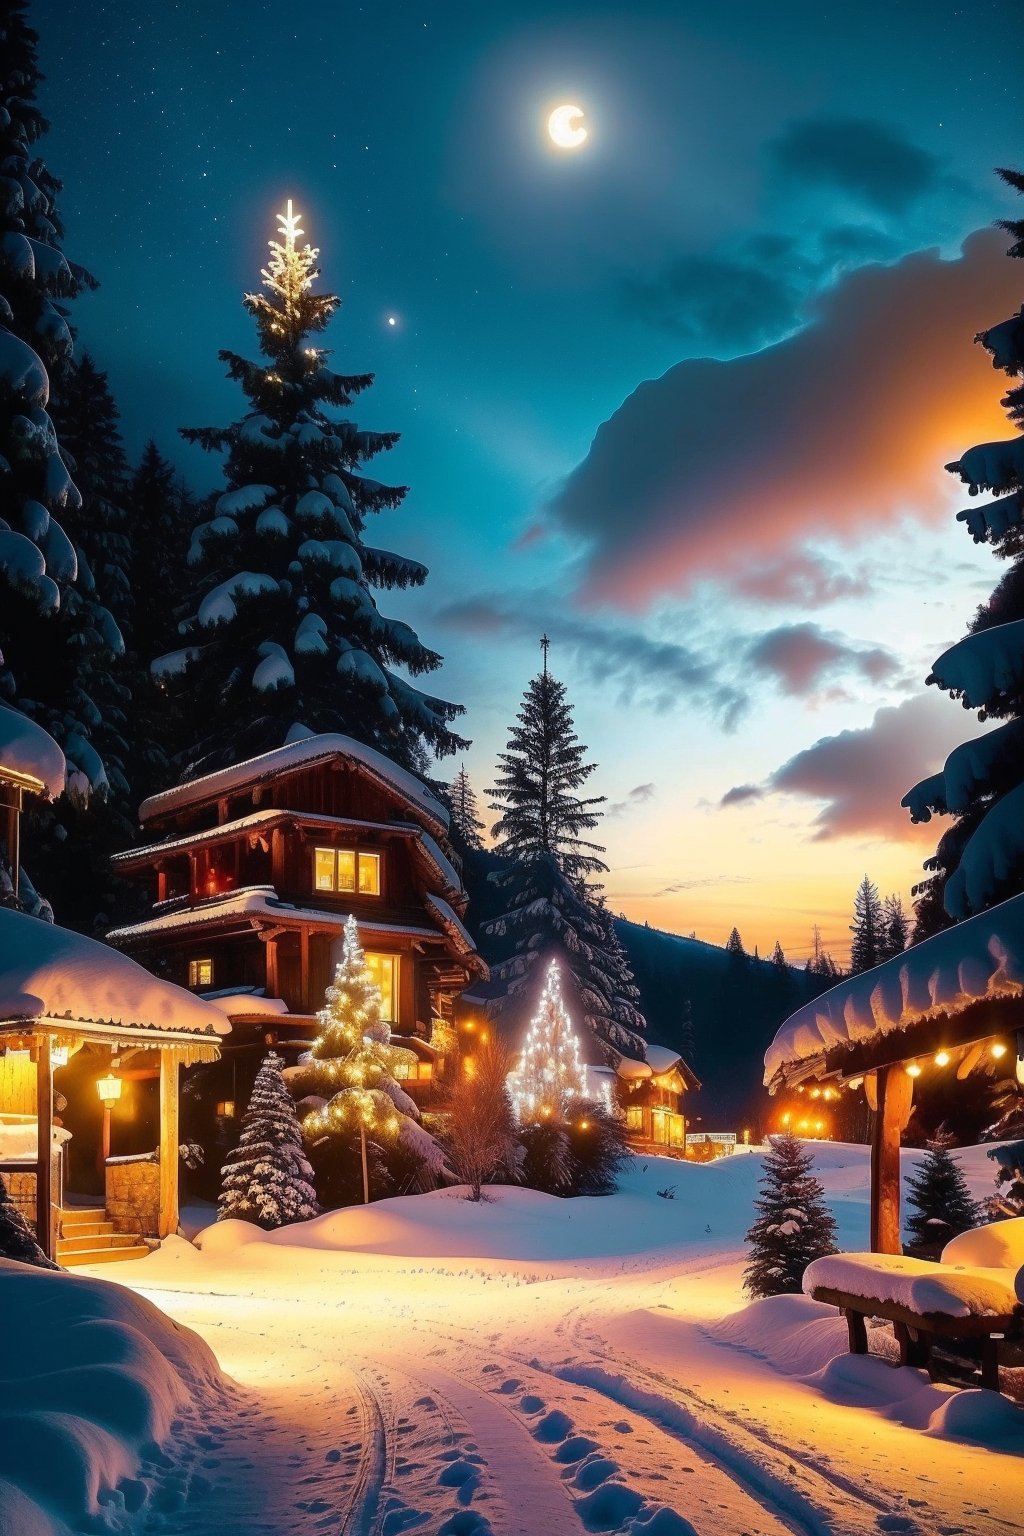 realistic and detailed, charming fairytale village, snowy decorated trees, street lamps benches, frozen lake, warm and inviting cabin, ultra sharp digital oil painting, snowflakes, mountains with waterfall, distant full moon with soft light, glitter, stars, stardust, hyper realistic, well rendered, detailed, vibrant sky, electric blues and purples in the style of Thomas Kinkade, lights and shadows for a wonderful scene,FFIXBG,Holy light,yofukashi background